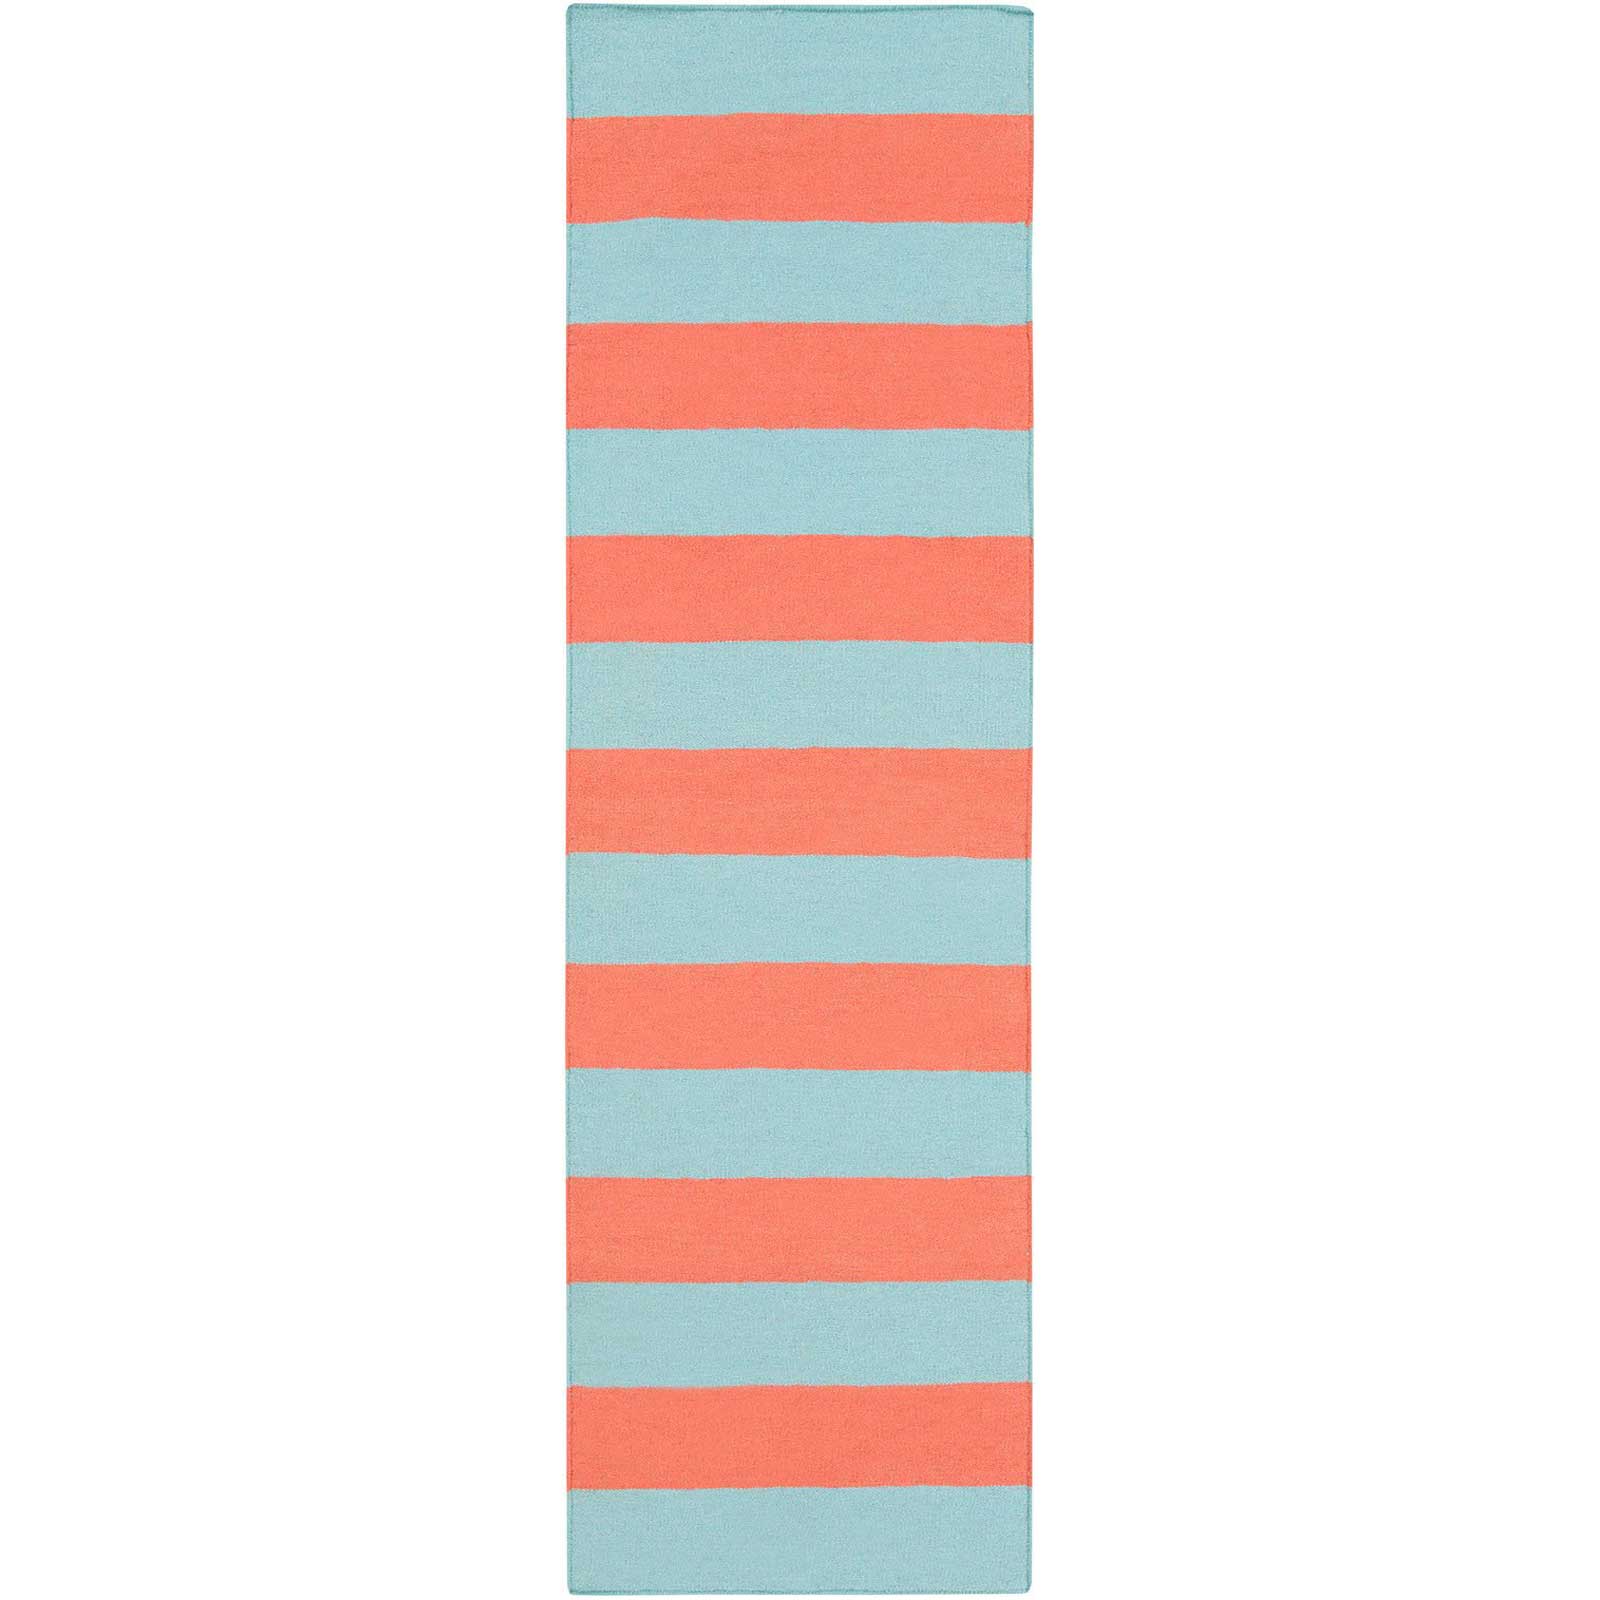 Frontier Striped Coral/Aqua Runner Rug